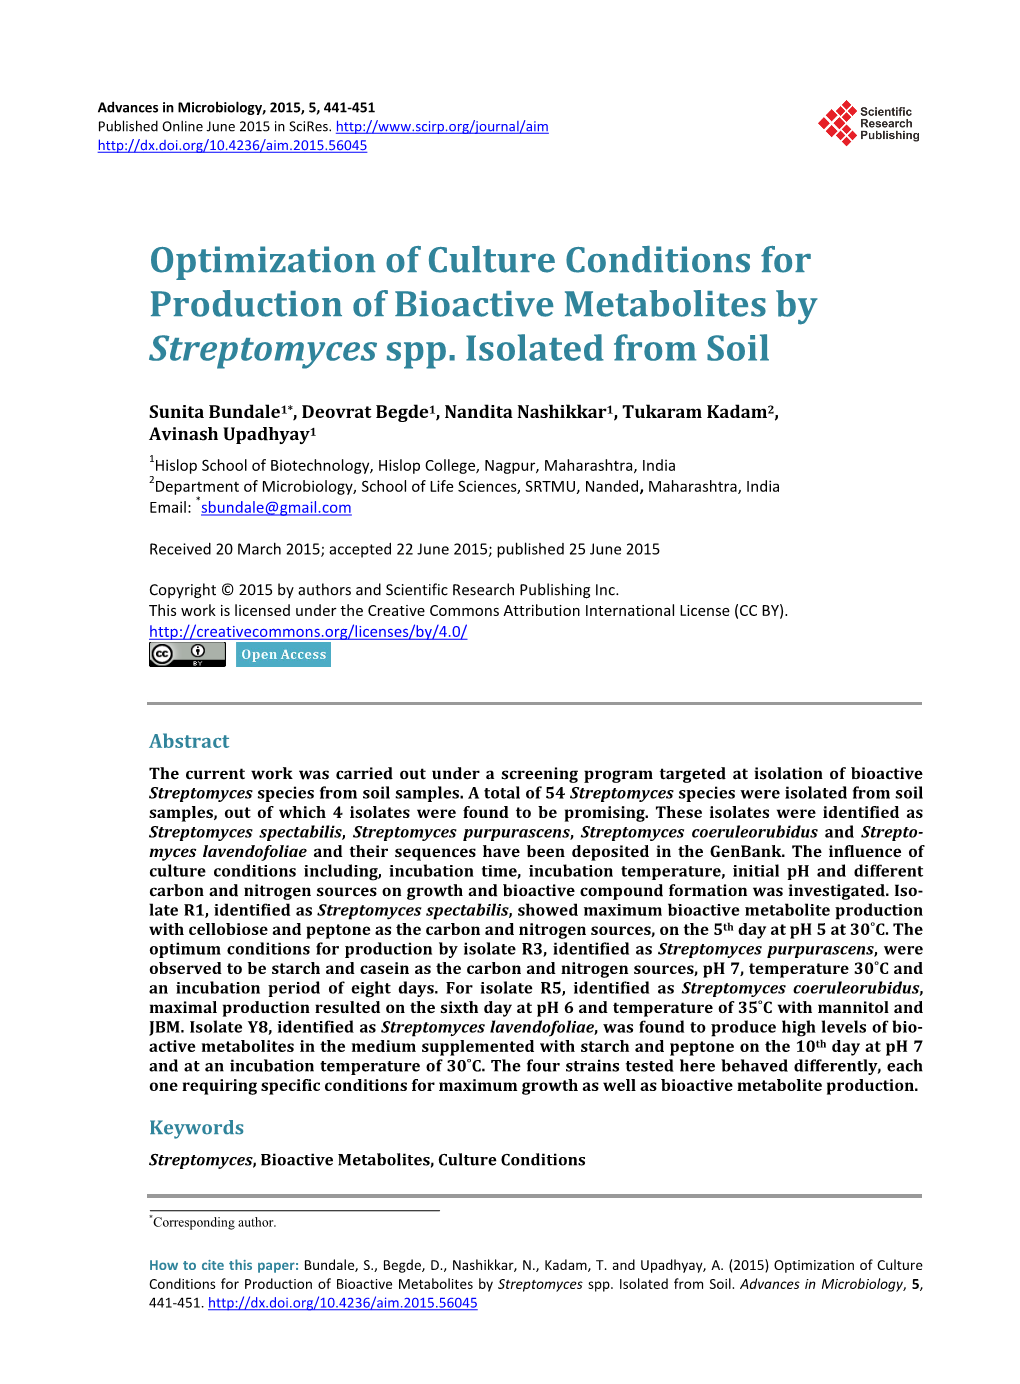 Optimization of Culture Conditions for Production of Bioactive Metabolites by Streptomyces Spp